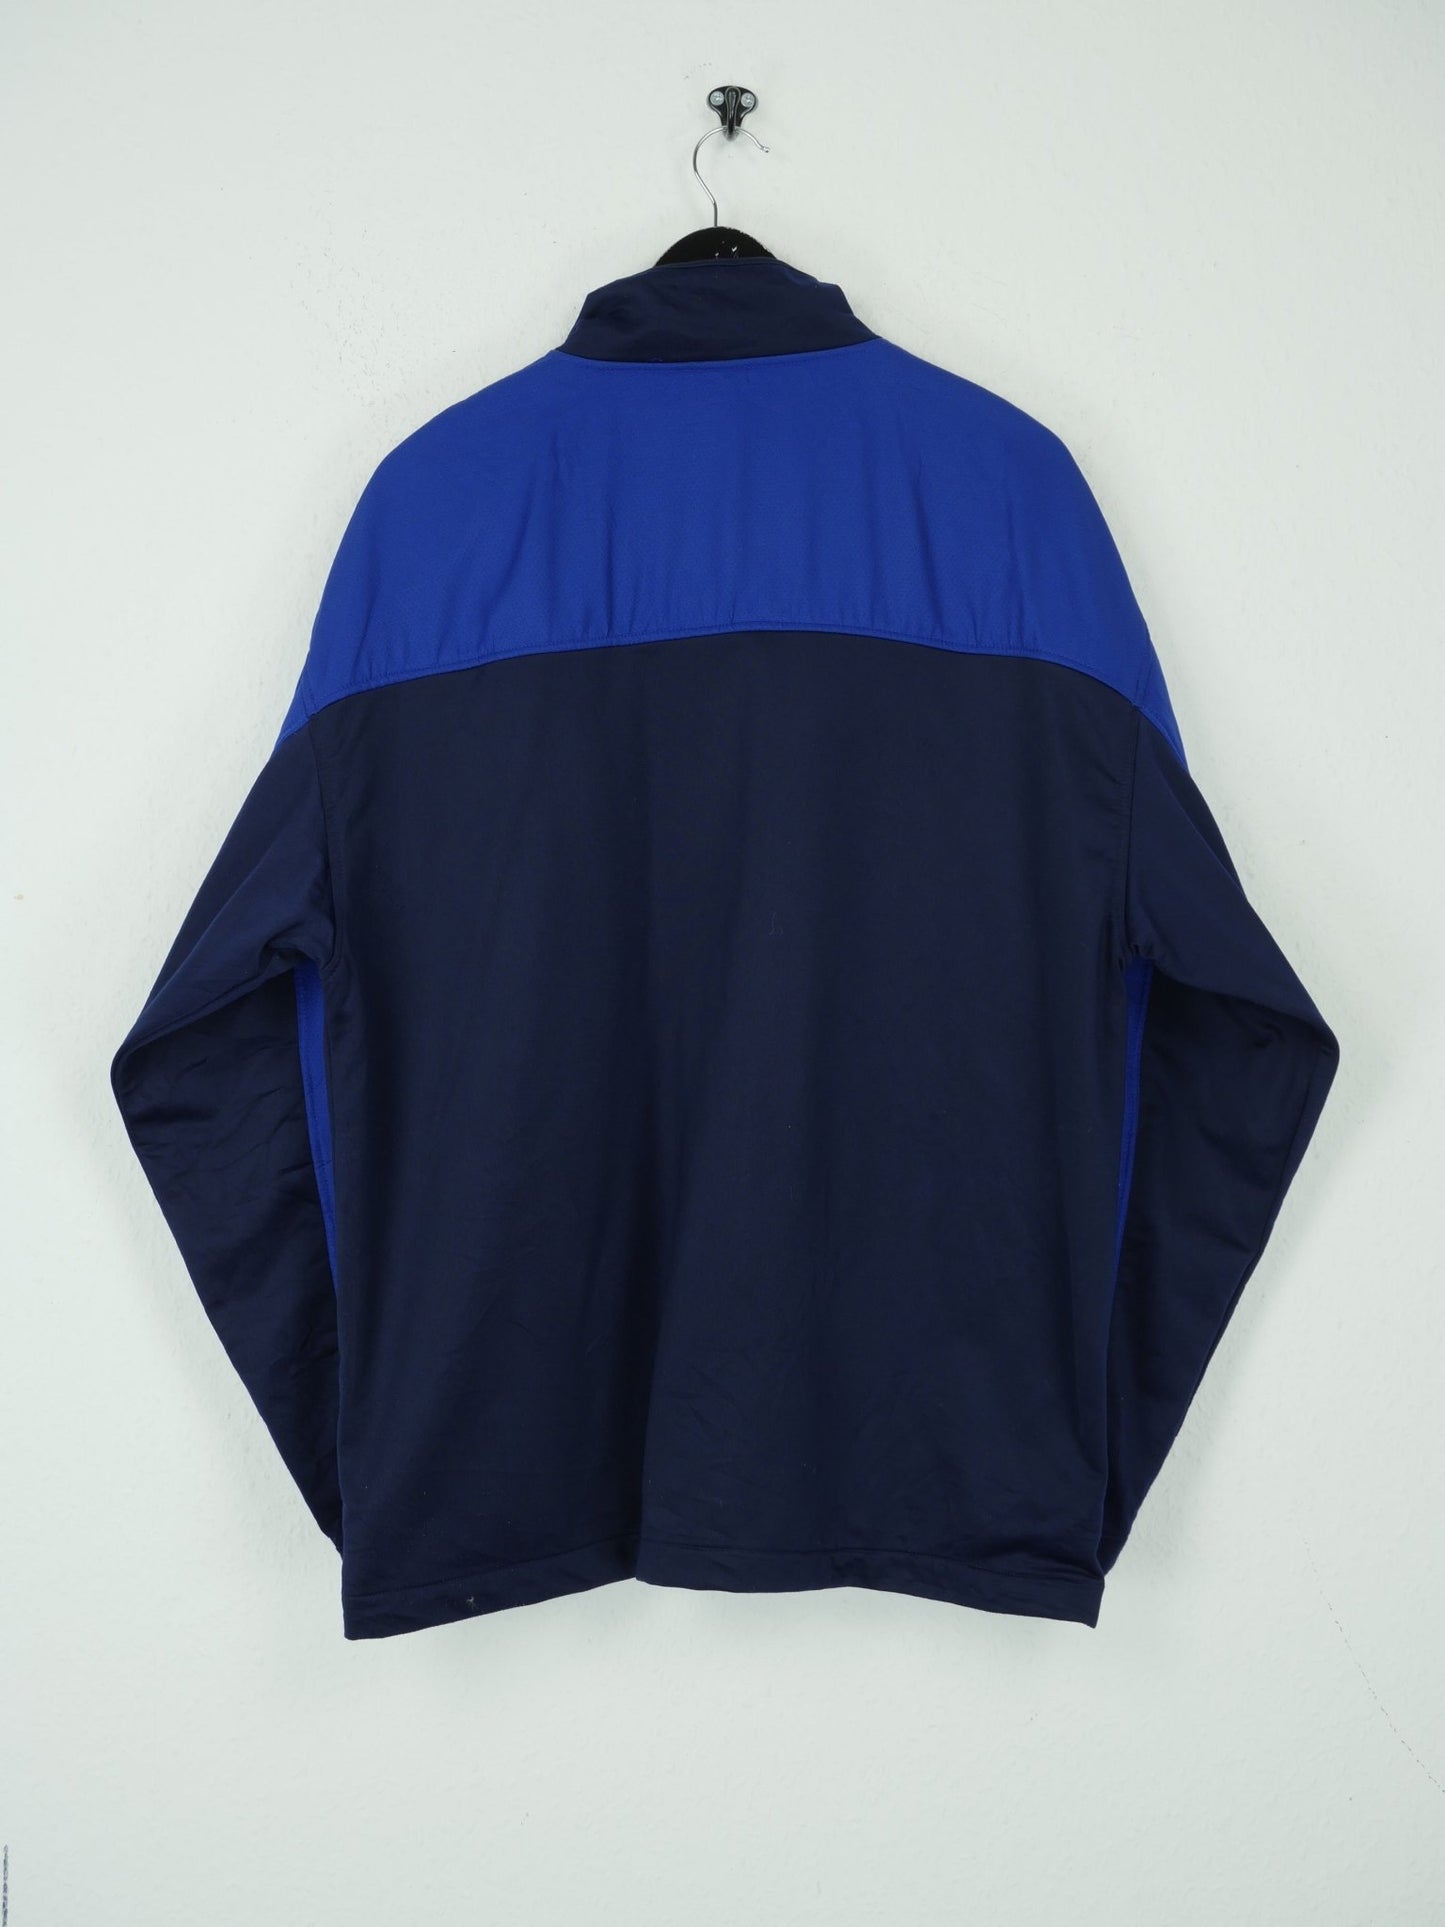 Starter embroiered Logo blue Track Jacket - Peeces